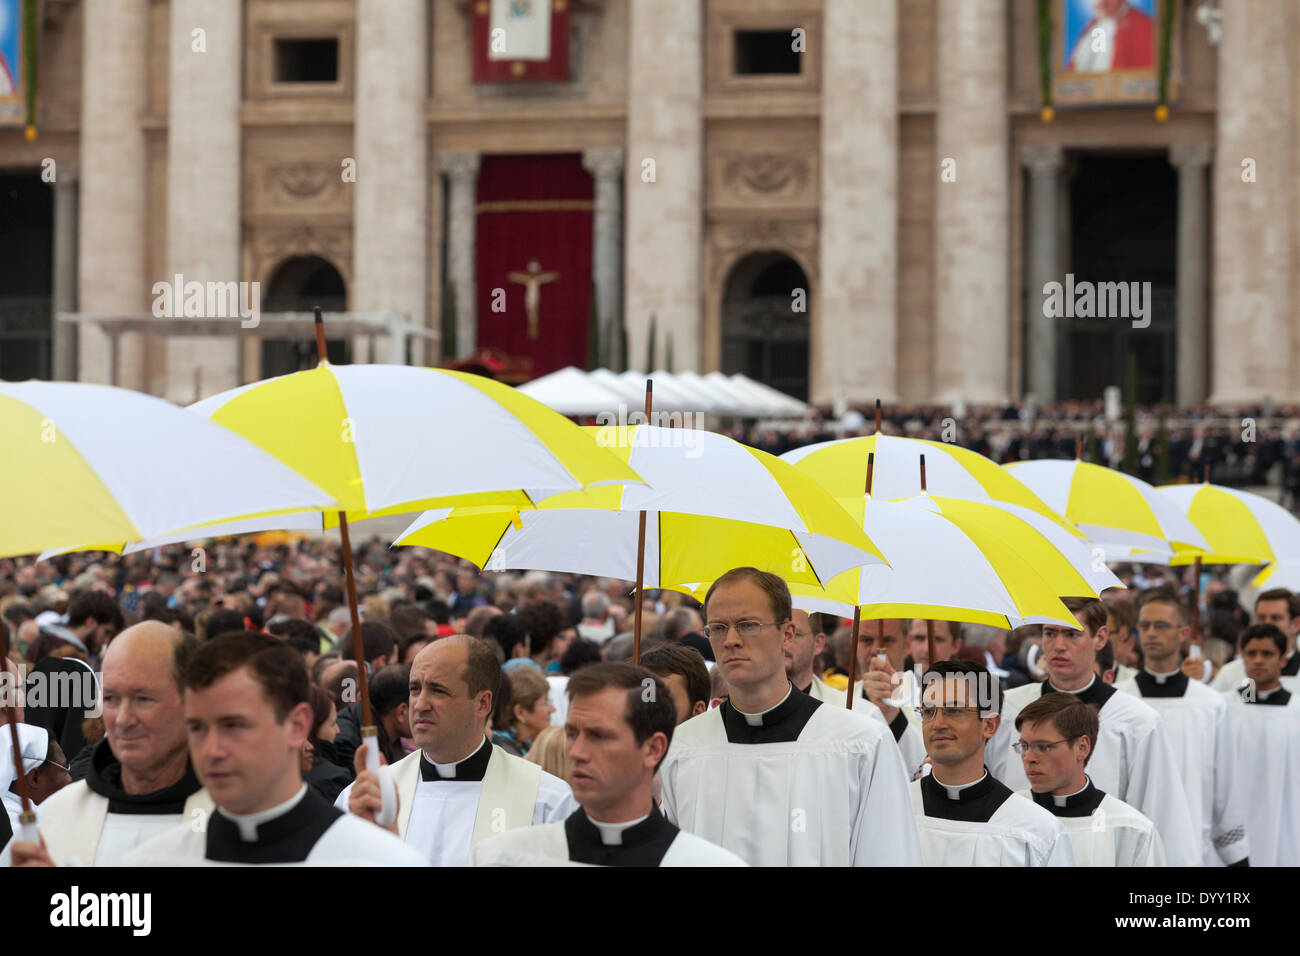 Procession of priest carrying umbrellas in St. Peter's Square Stock Photo